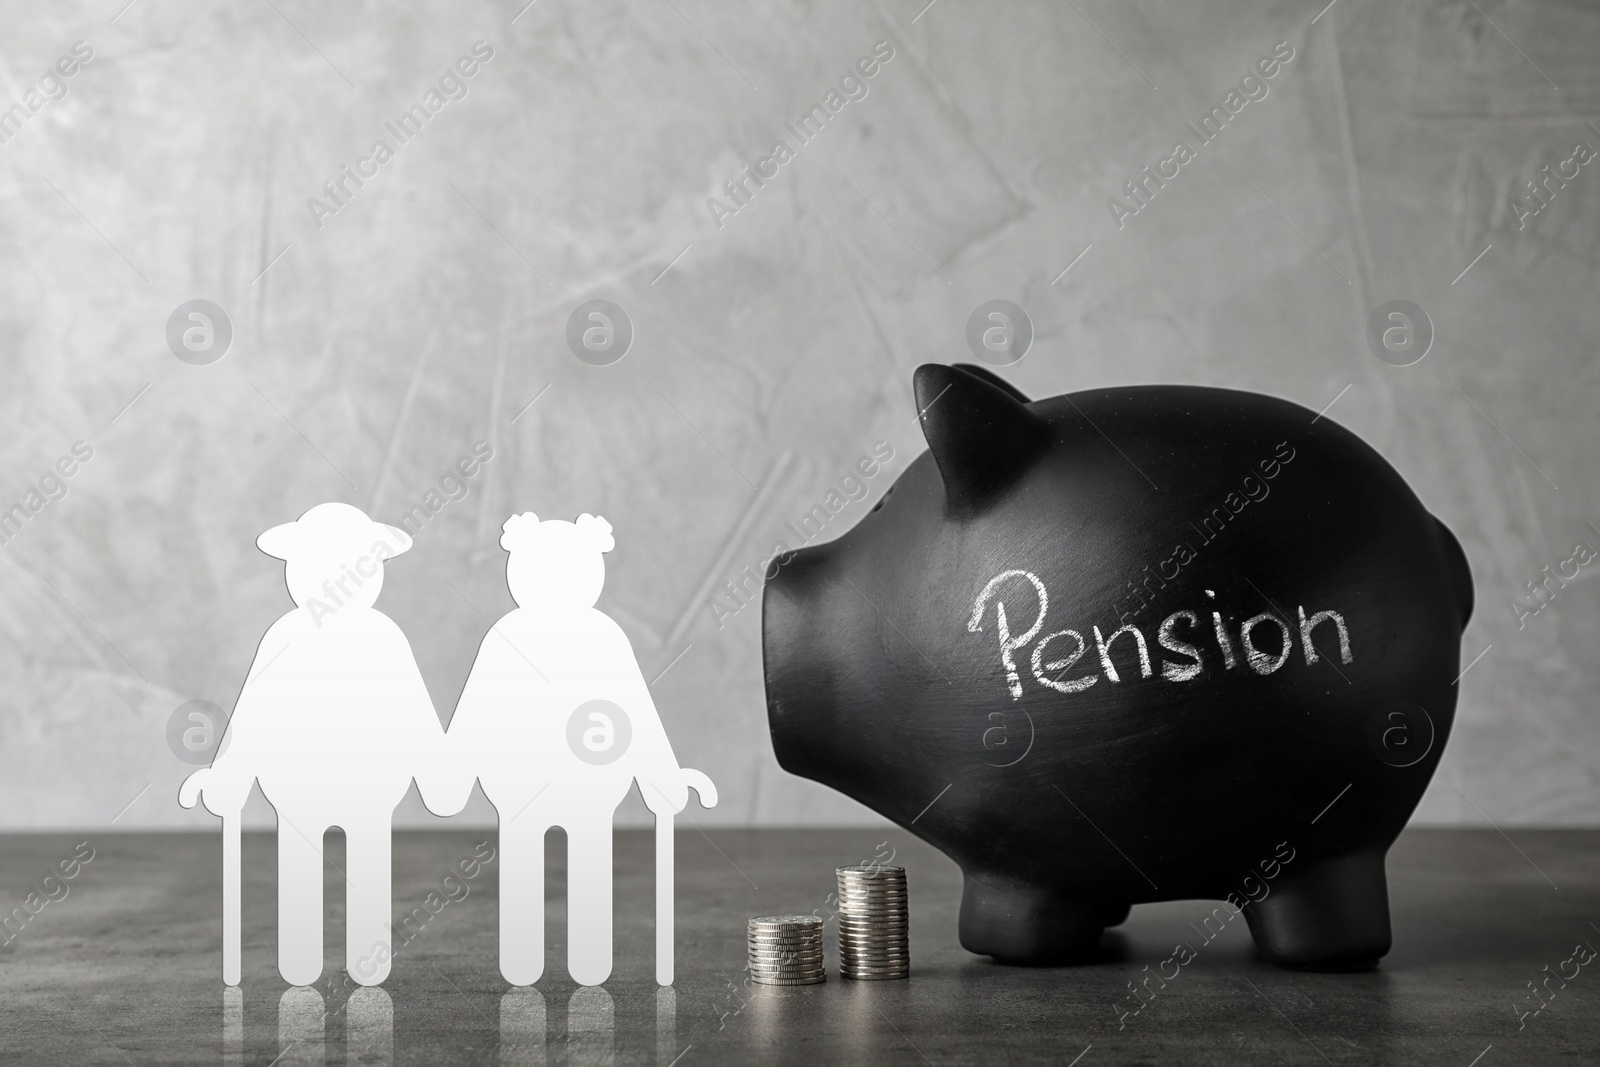 Image of Pension concept. Elderly couple illustration, coins and piggybank on grey table